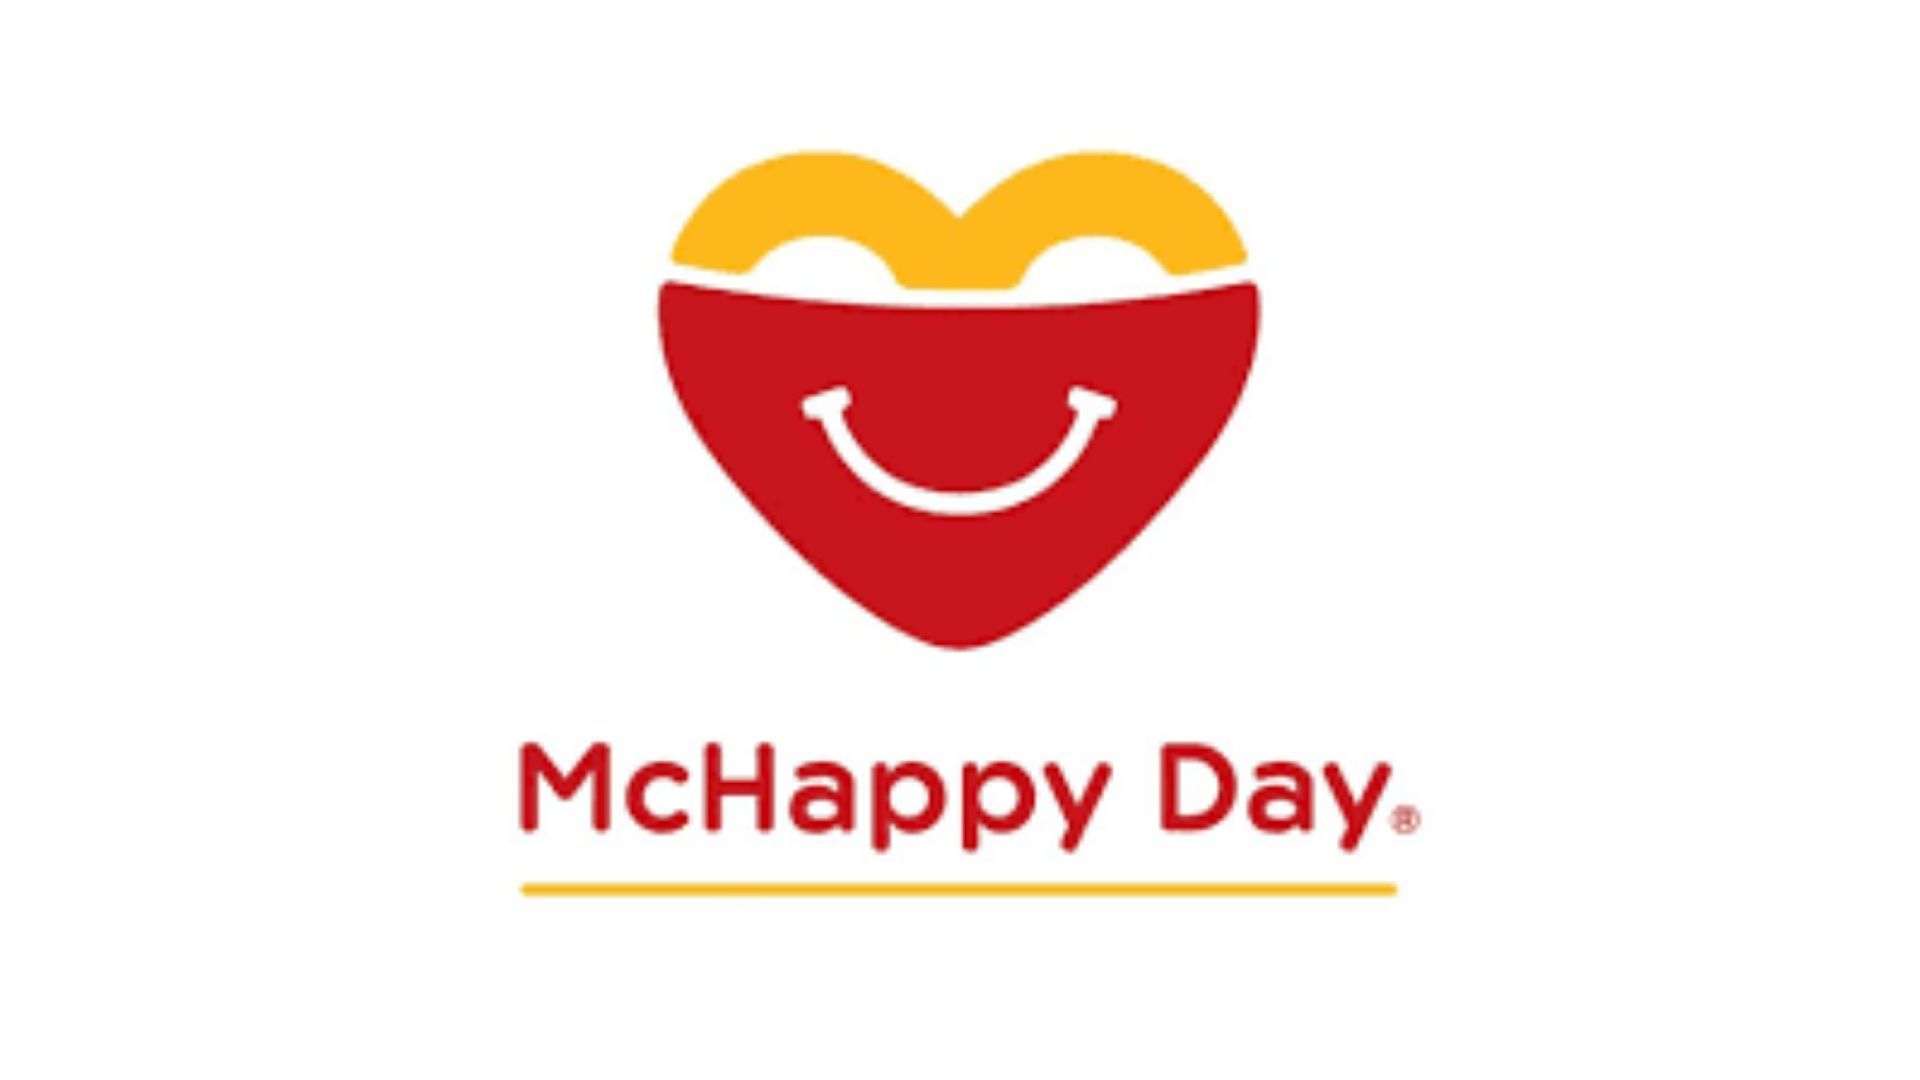 McDonald's The World's Leading Fast Food Chain [Case Study]